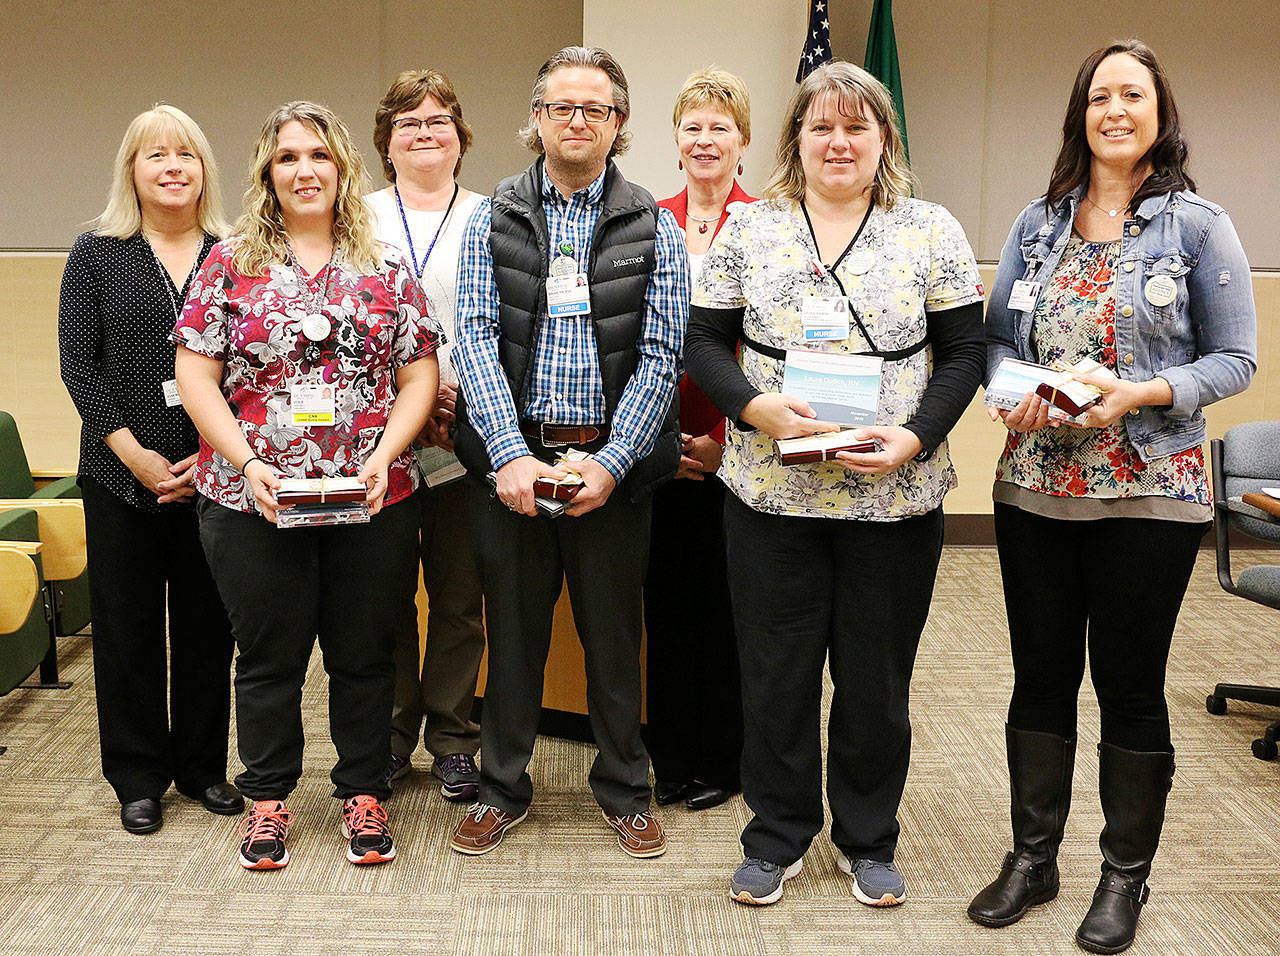 Milestone: OMC gives kudos to Olympic Medical Home Health staff